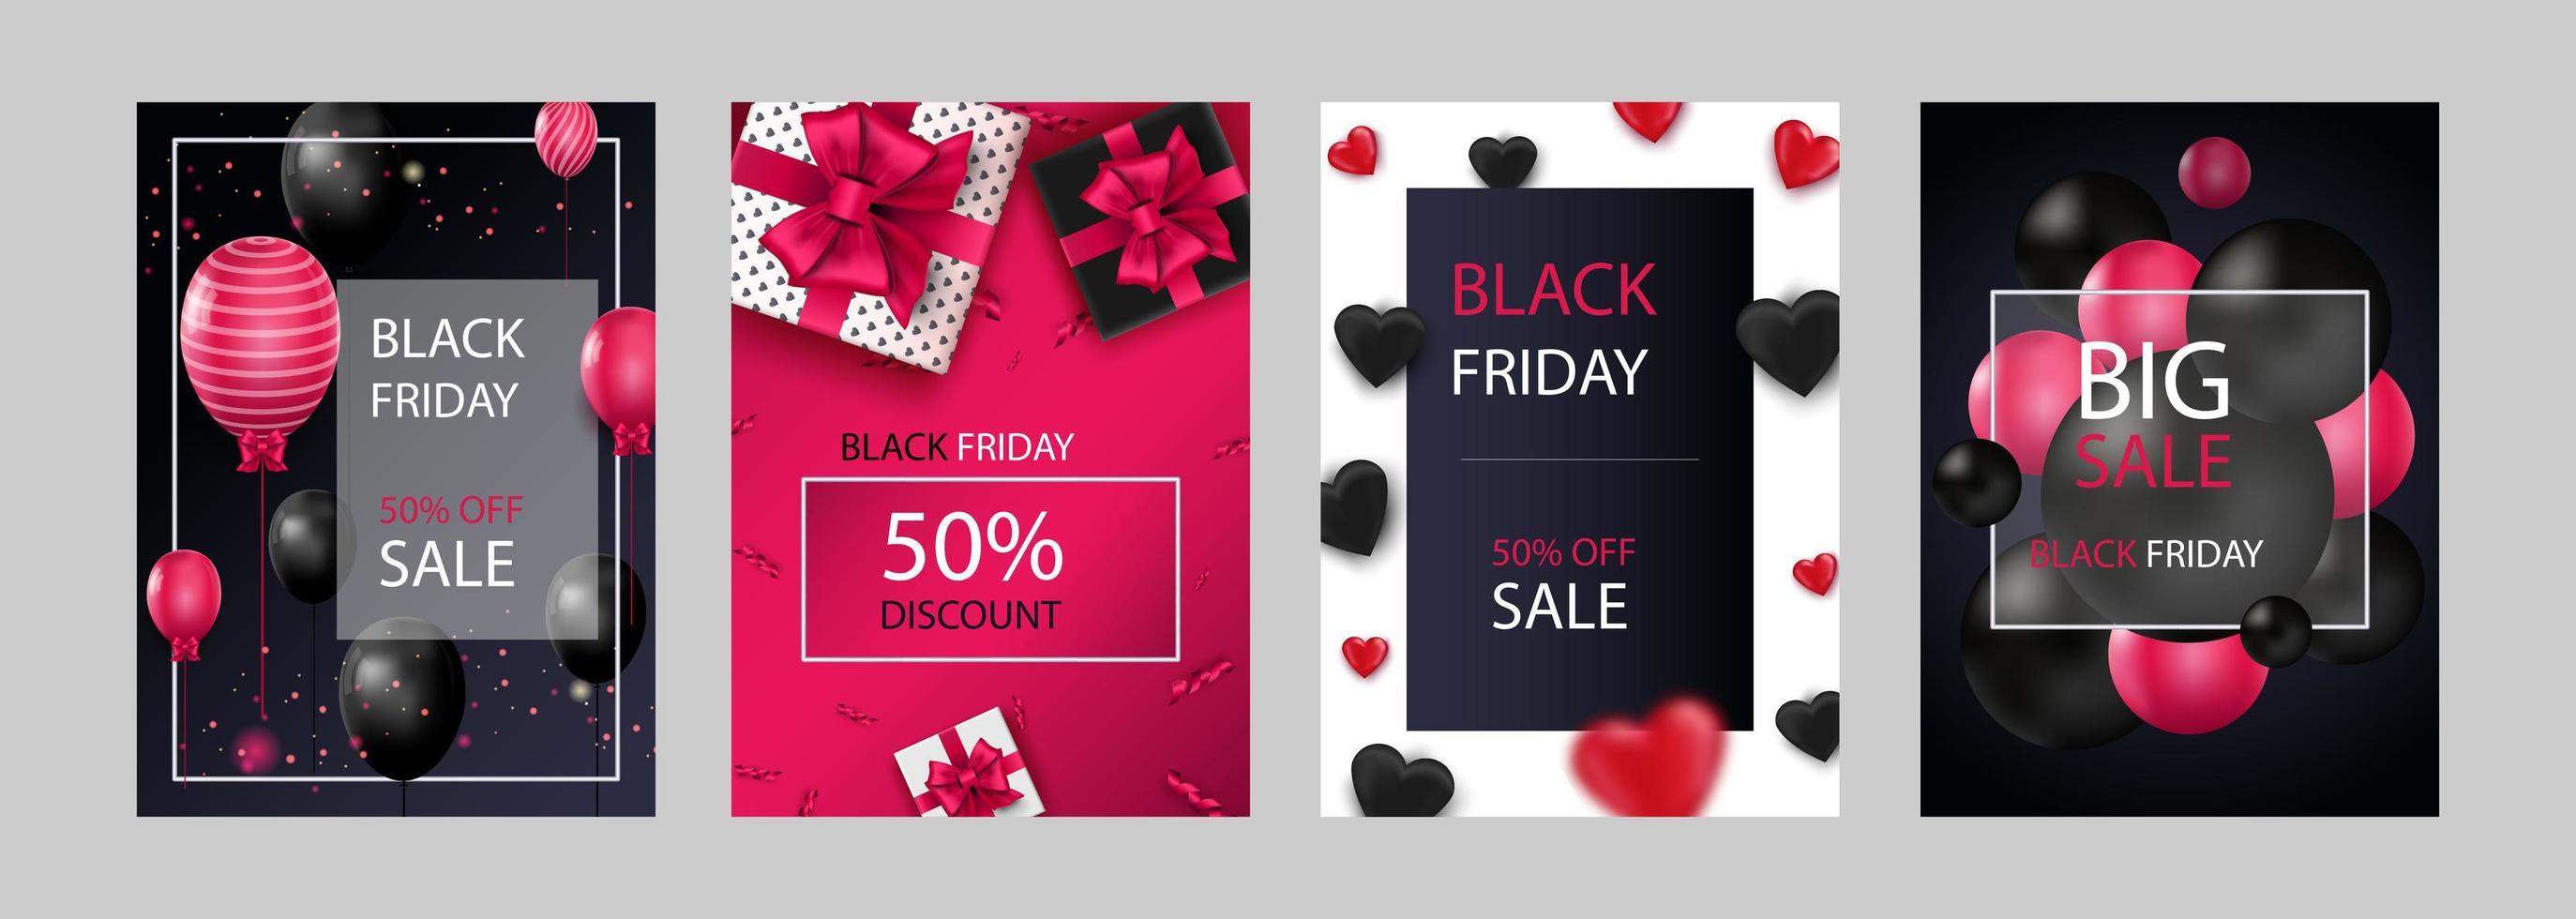 Black Friday Sale set of posters or flyers design with balloons and confetti. Black Friday cover design. Sale discount prices announcement brochure layout. Vector illustration with realistic elements.